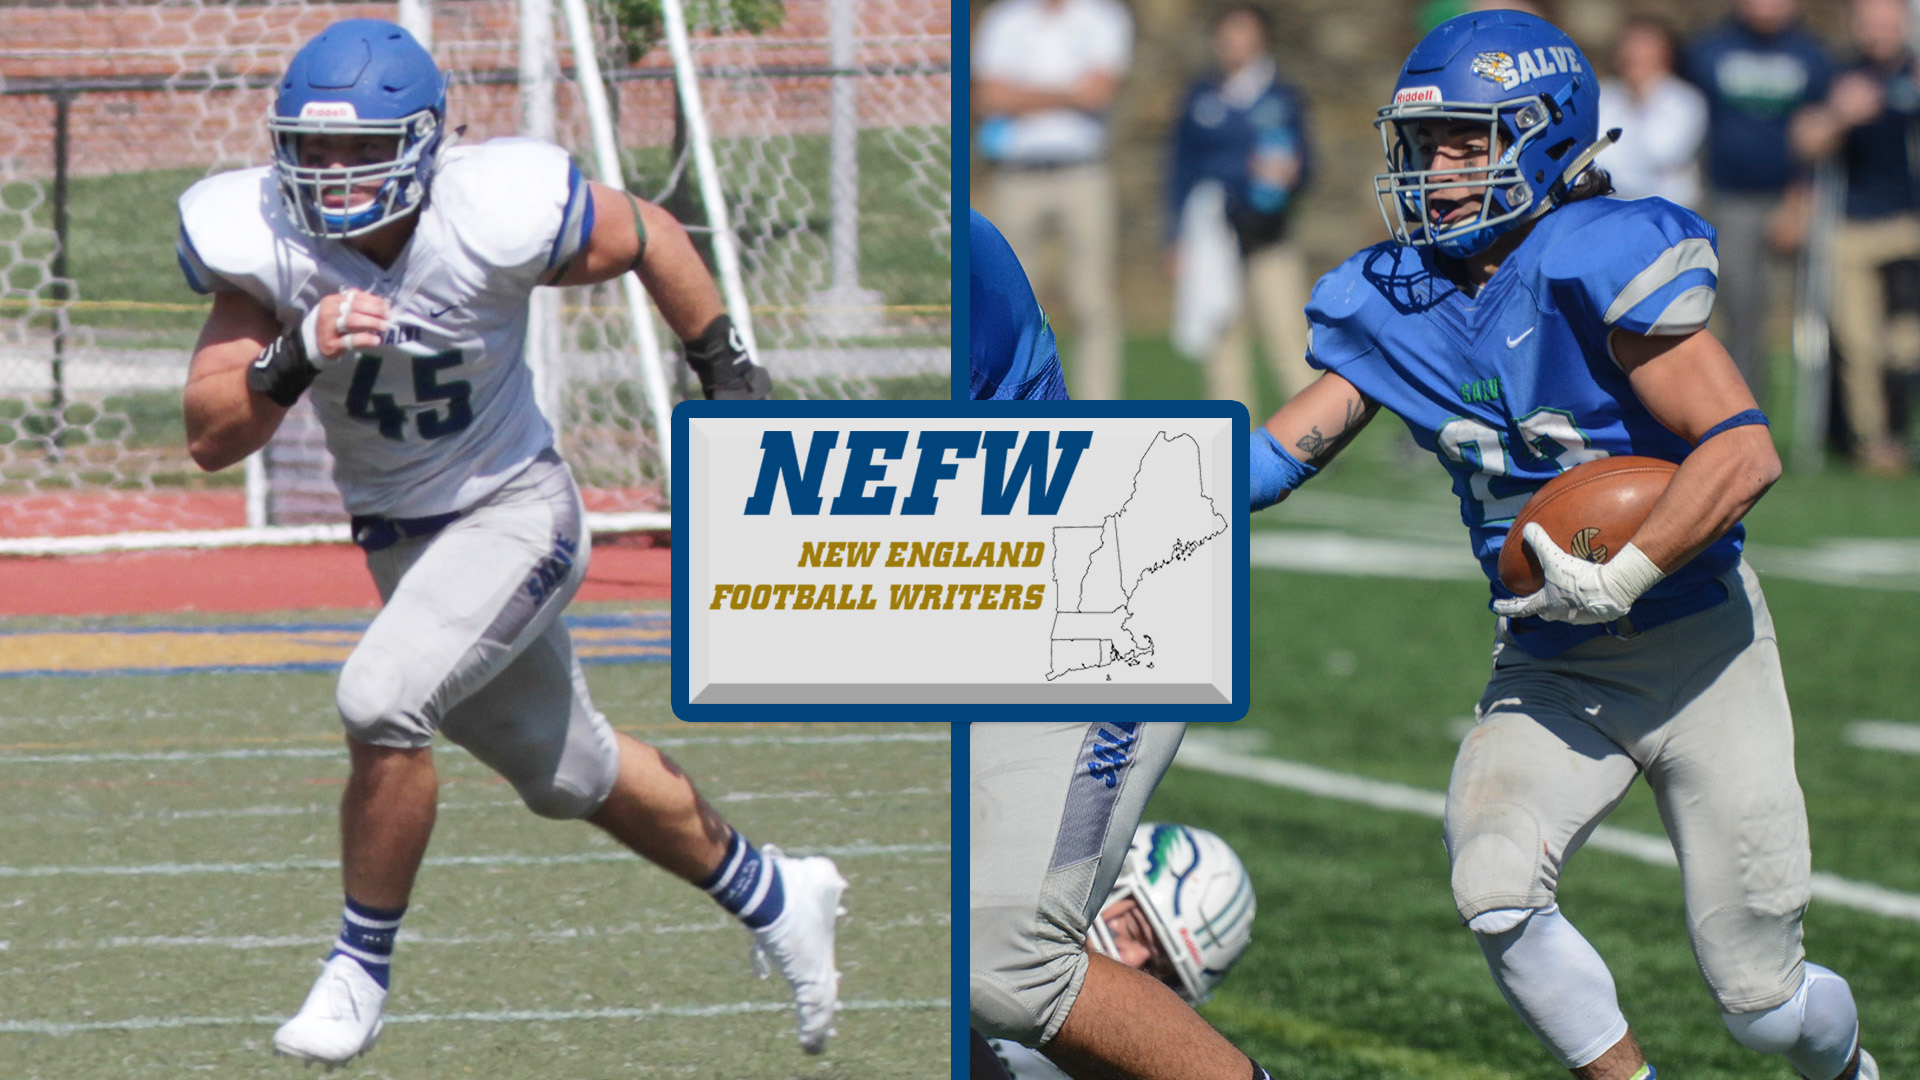 Matt Messner and Joey Mauriello both named New England Football Writers (NEFW) All-New England players.